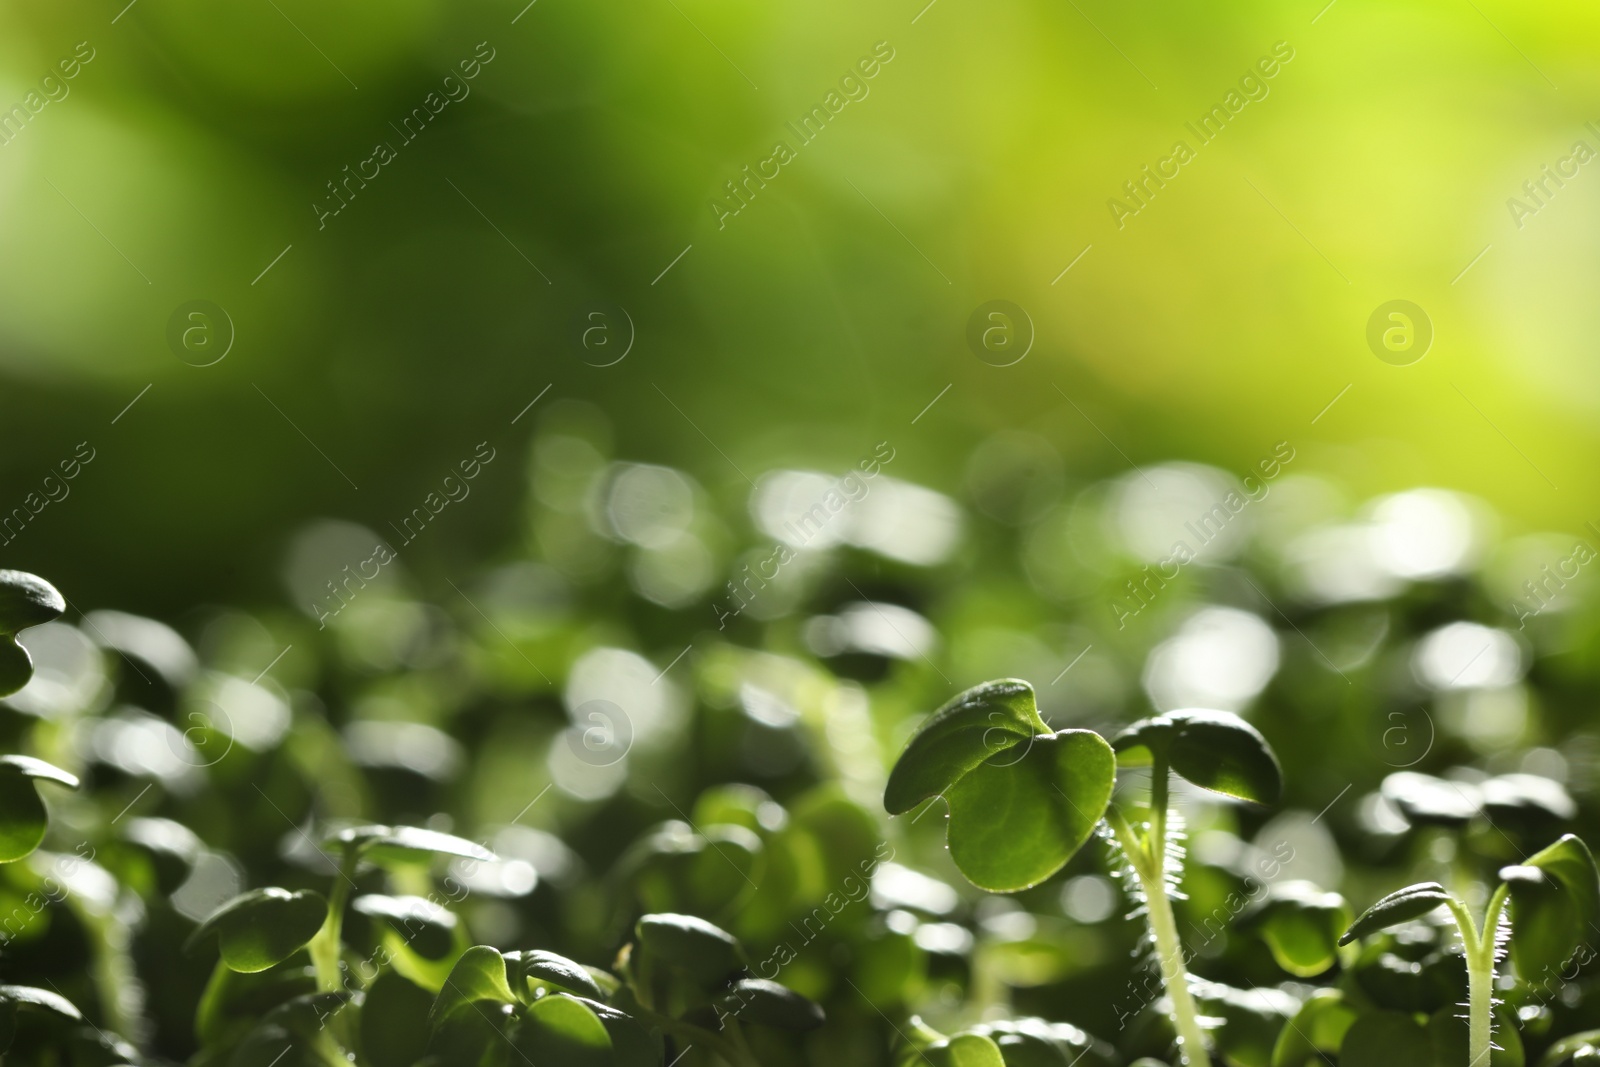 Photo of Sprouted arugula seeds on blurred background, closeup view